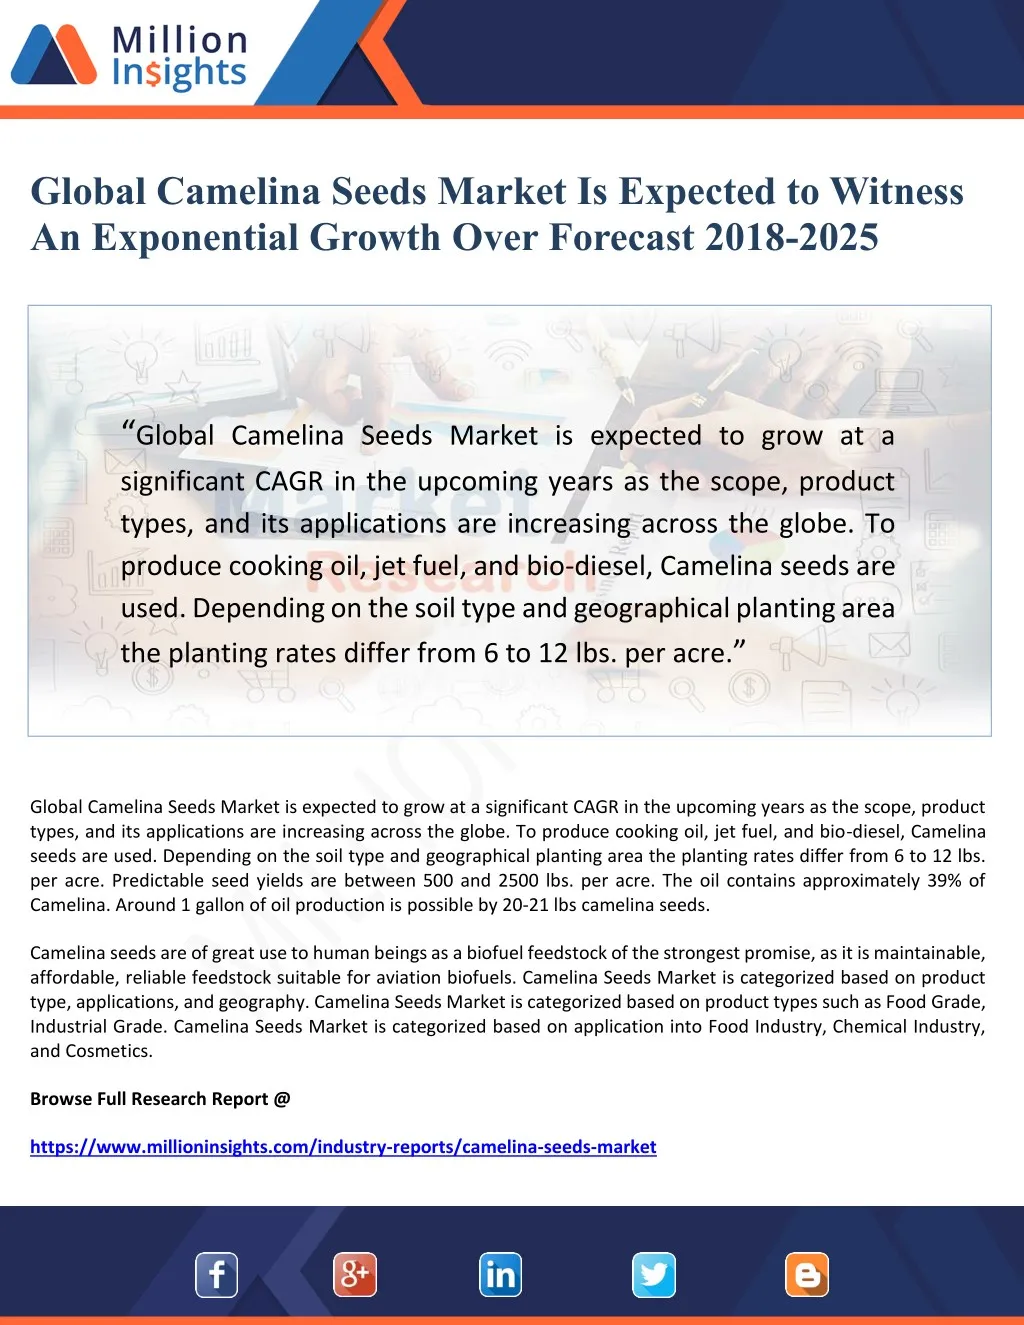 global camelina seeds market is expected